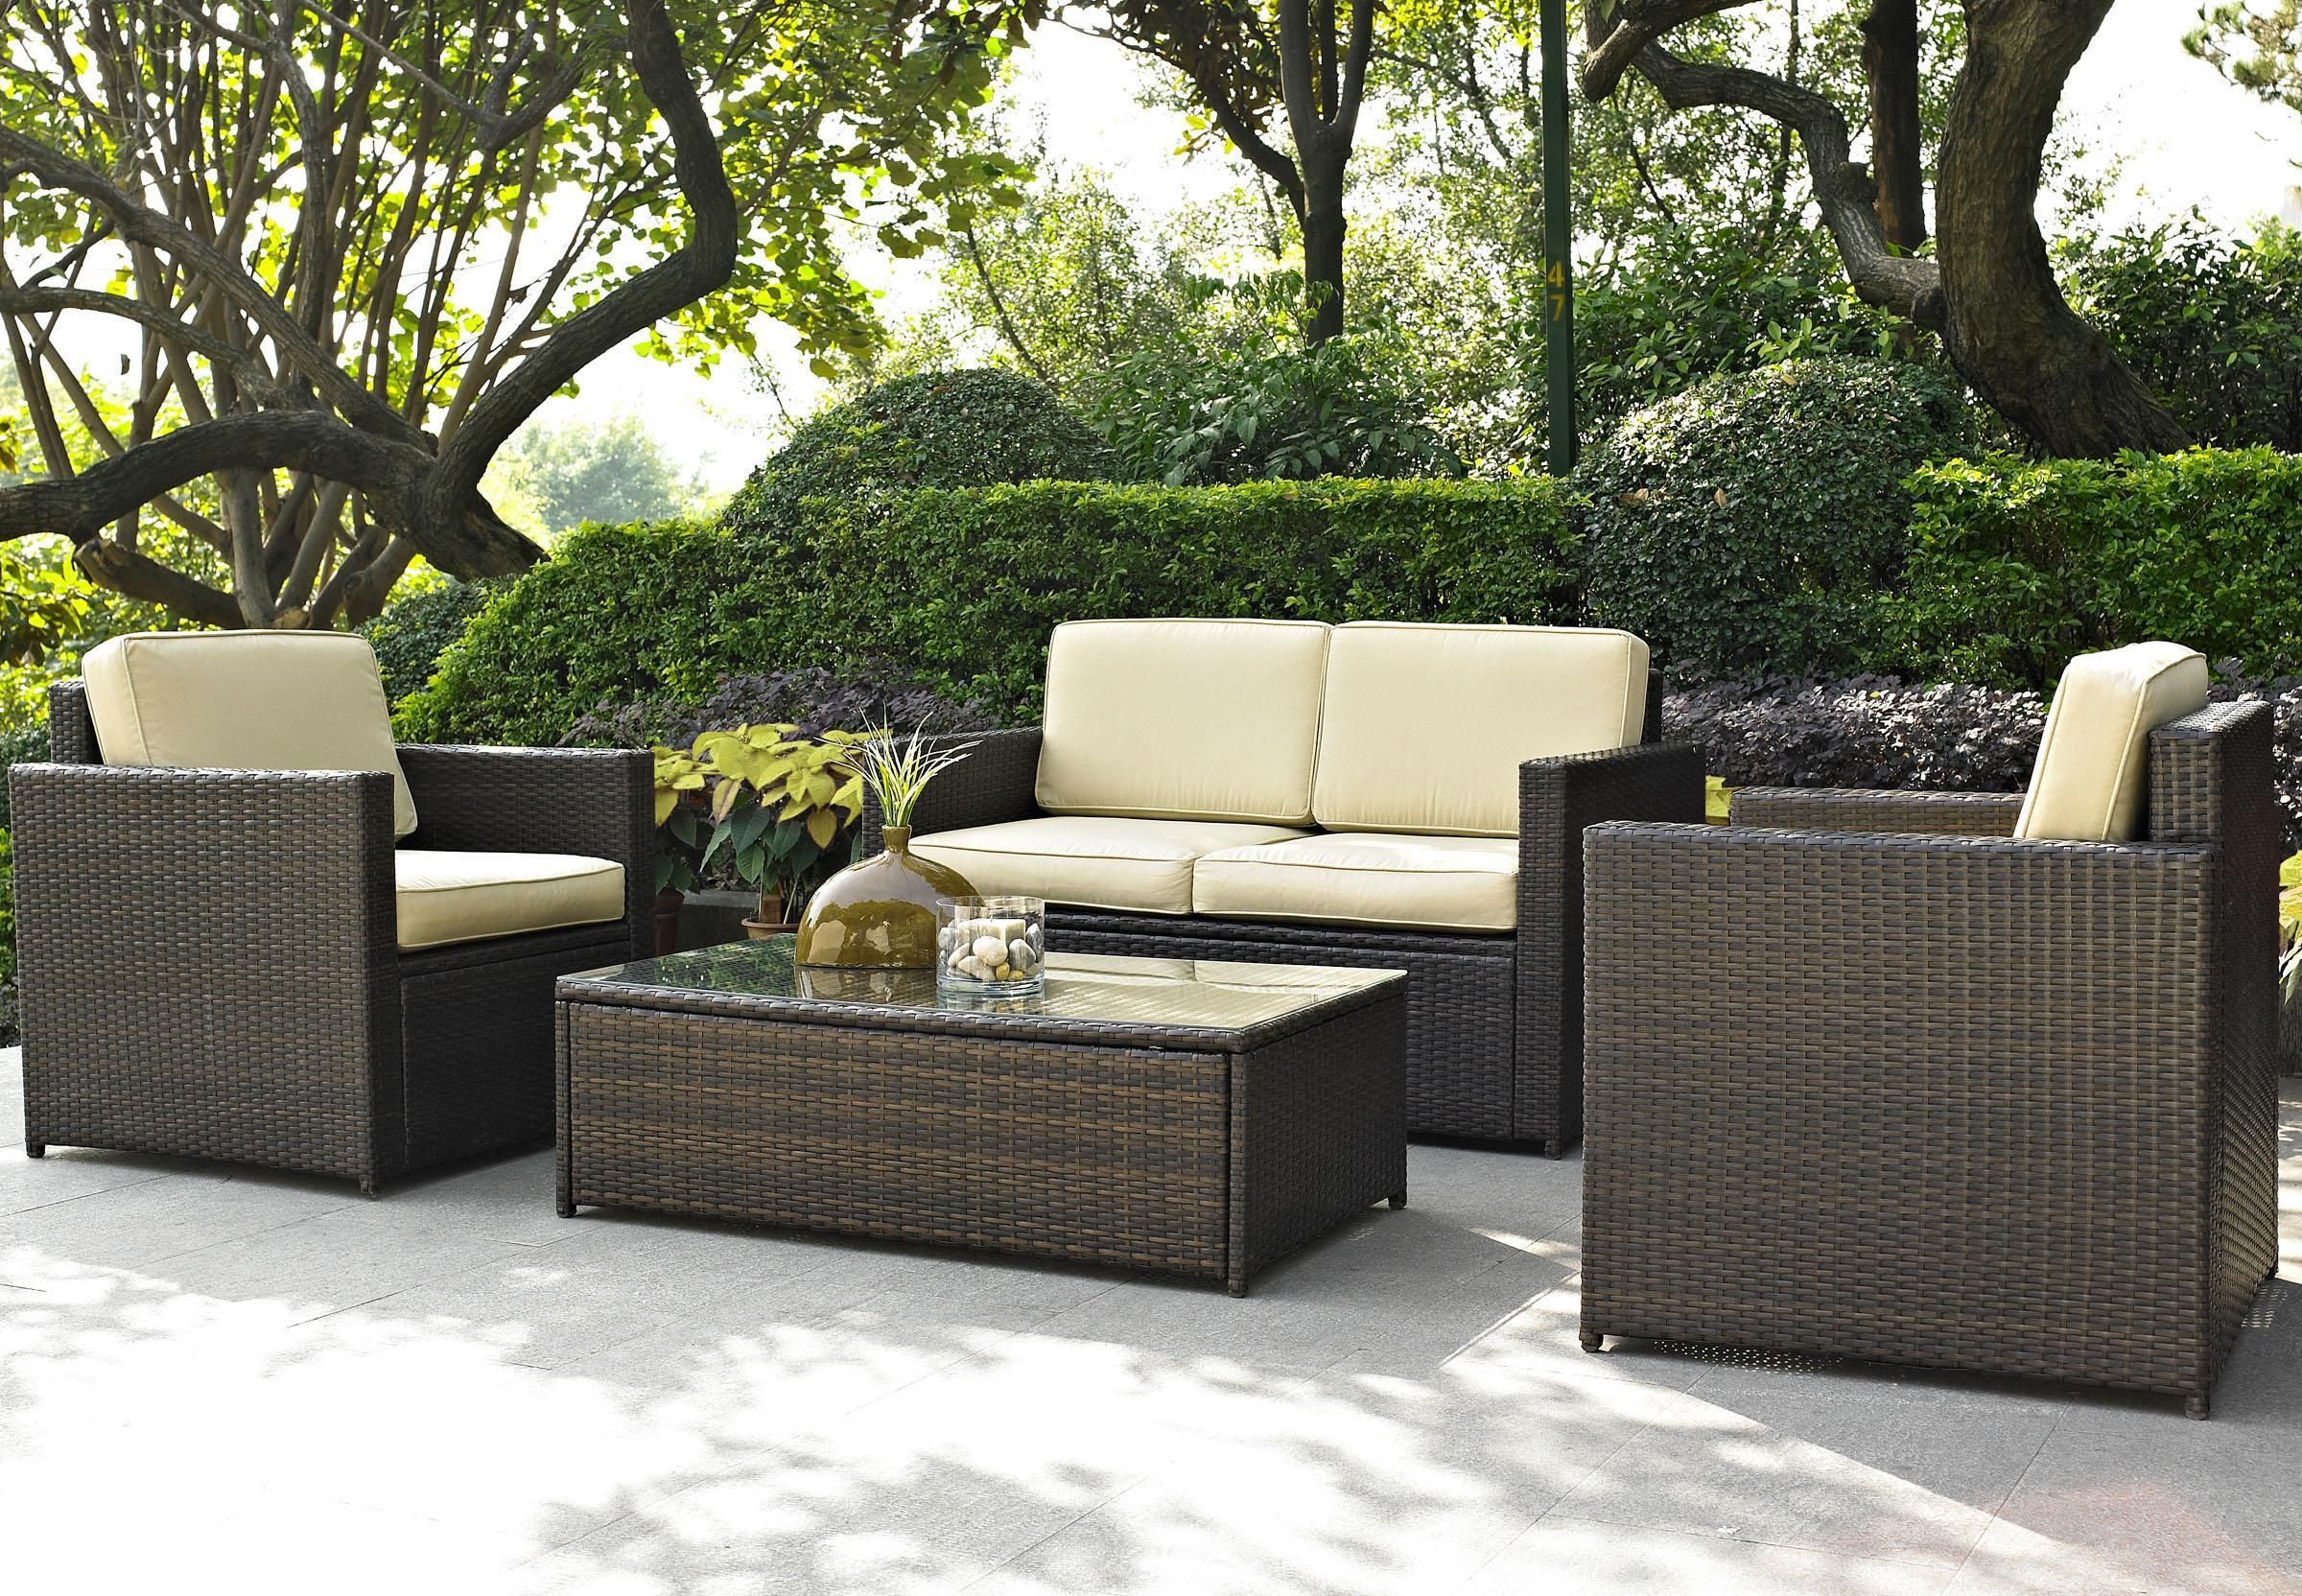 Fireplace: Wonderful Frontgate Outdoor Furniture For Patio Pertaining To Outdoor Sofa Chairs (View 10 of 20)